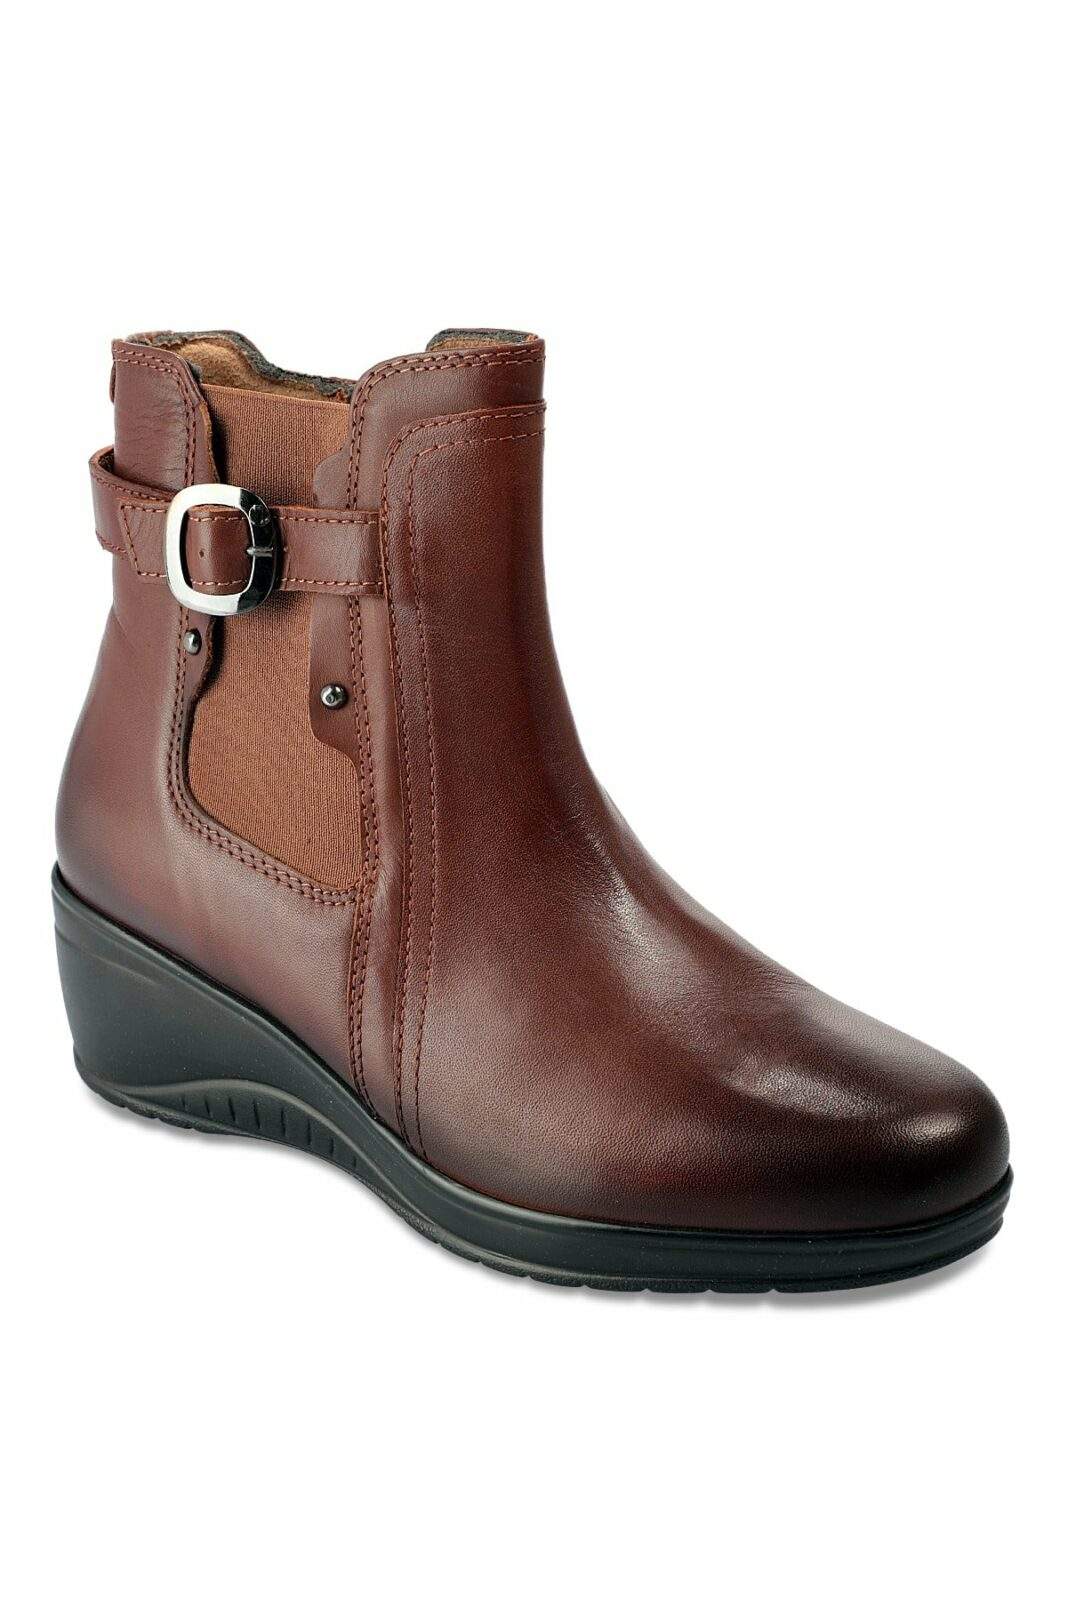 Forelli Ankle Boots - Brown